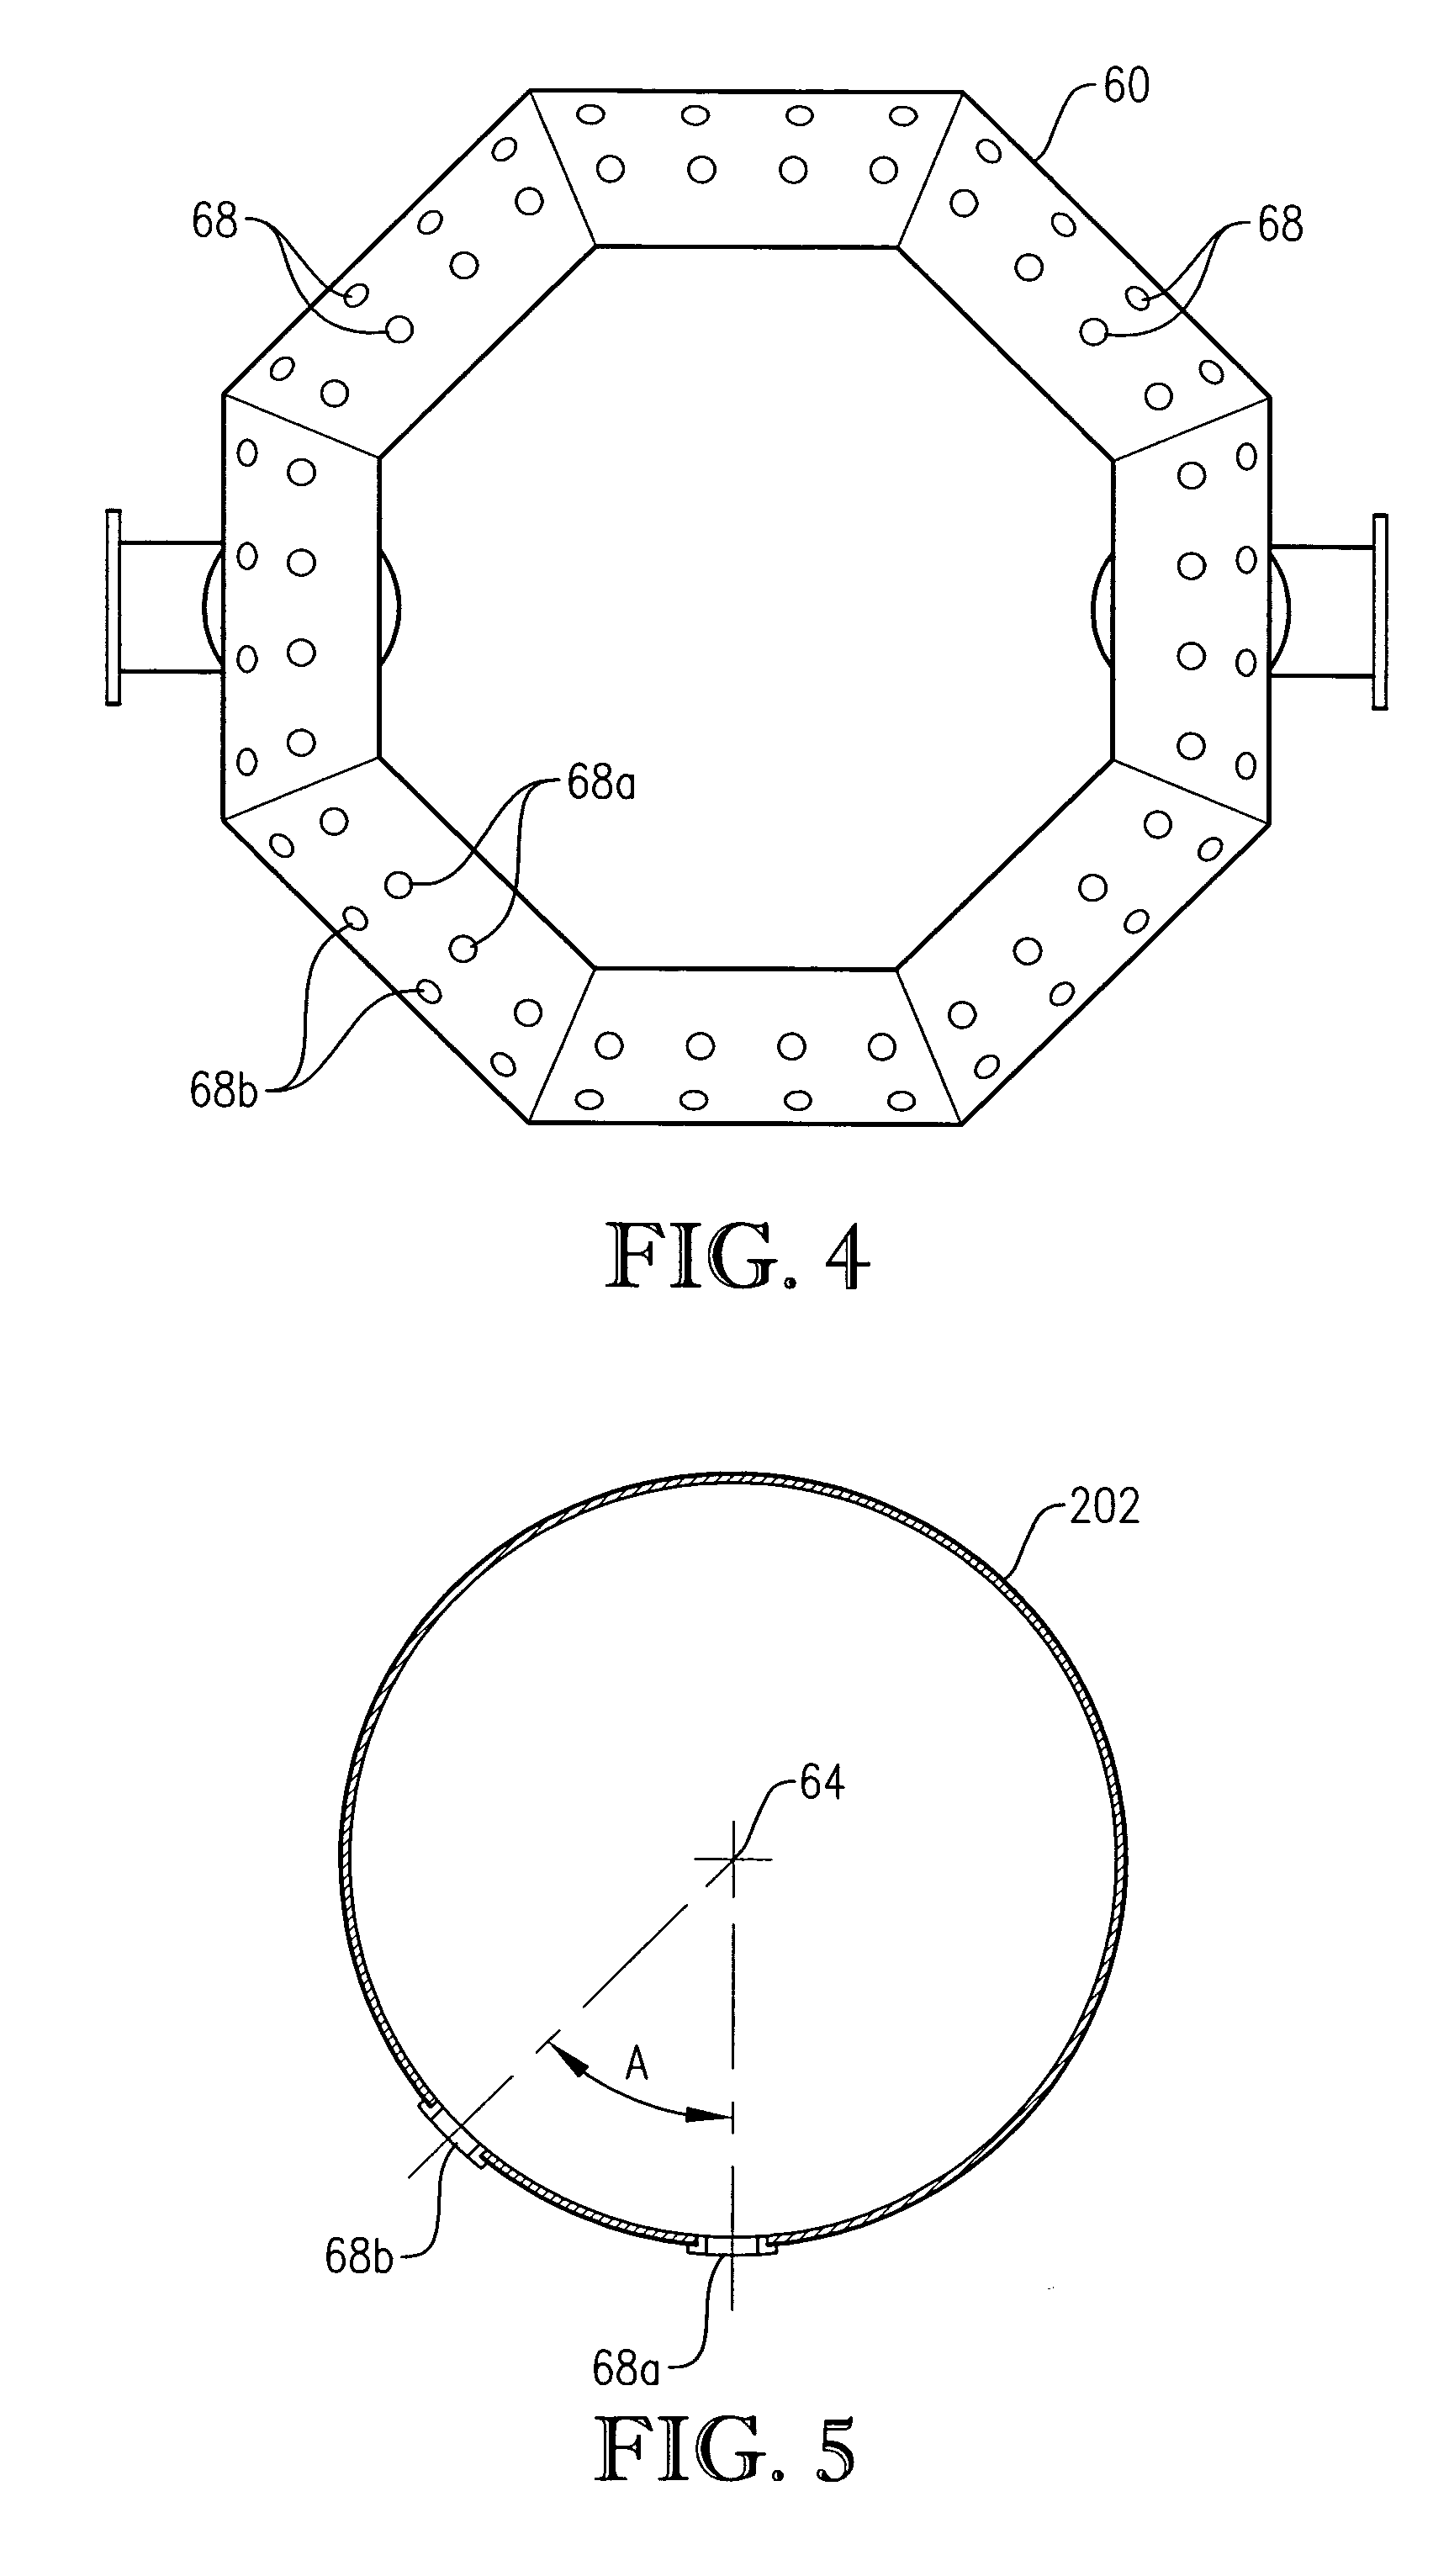 Oxidation system with sidedraw secondary reactor